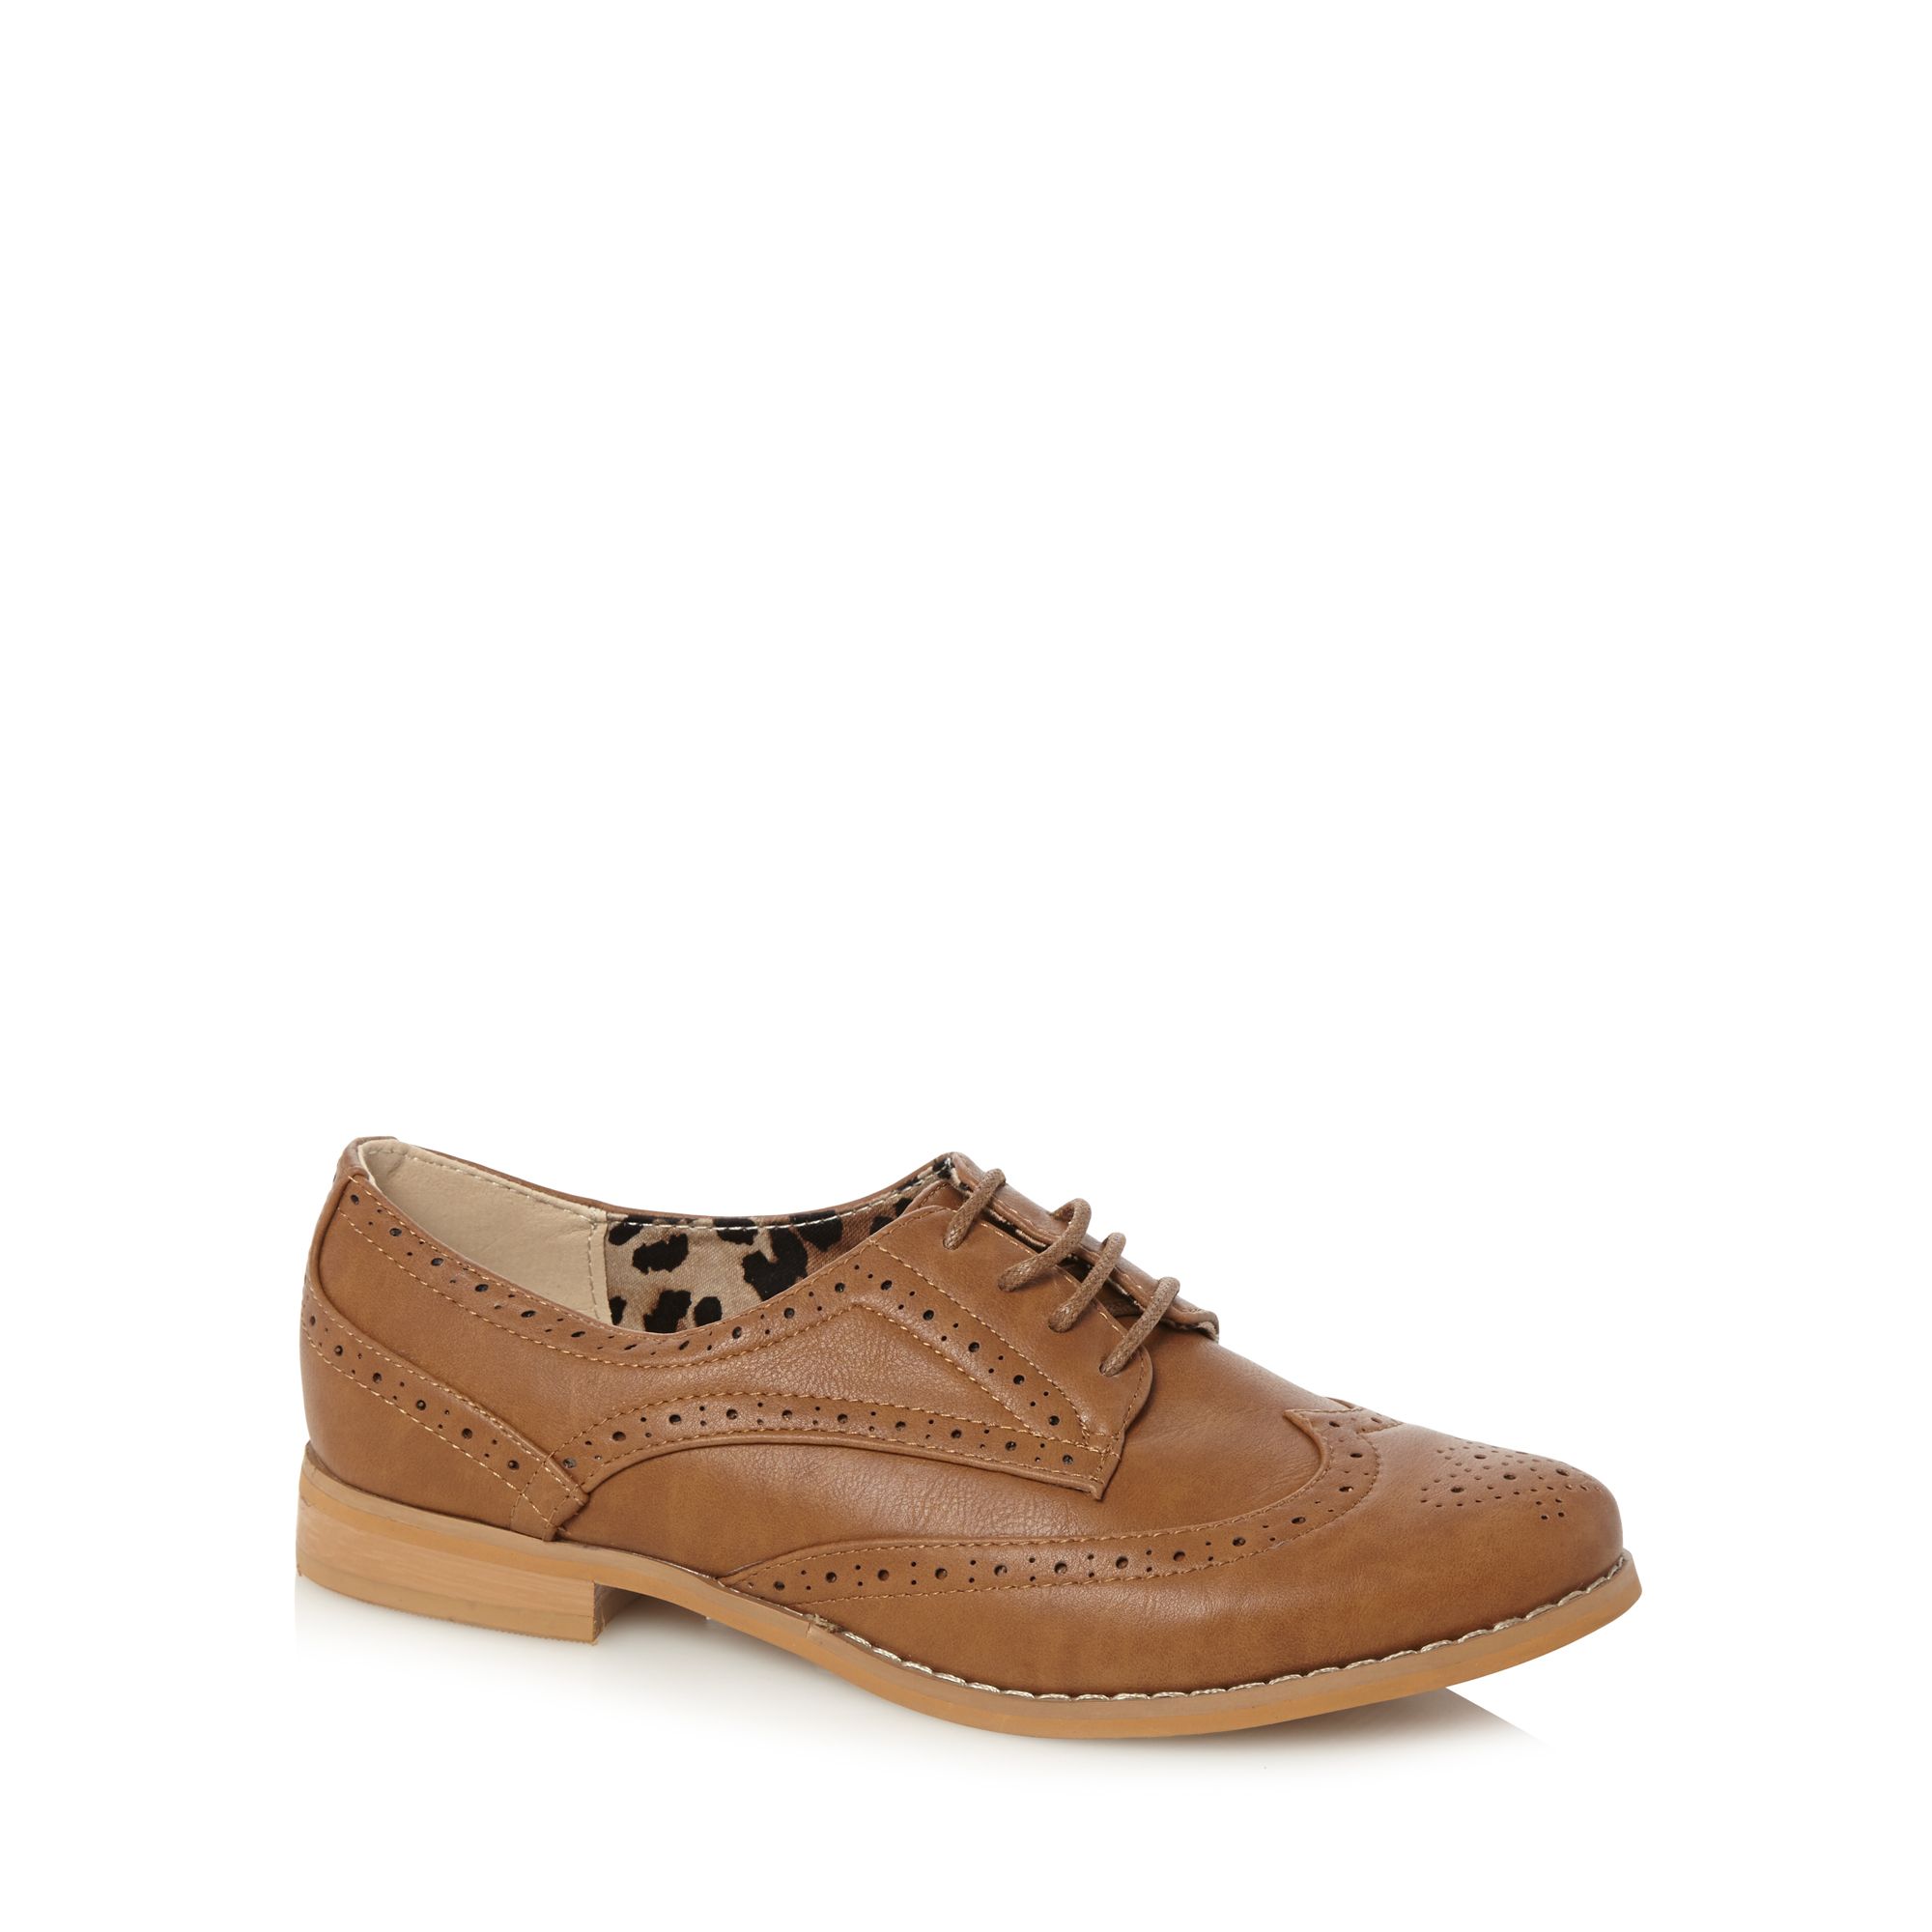 Red Herring Womens Tan Punched Hole Lace Up Brogues From Debenhams | eBay